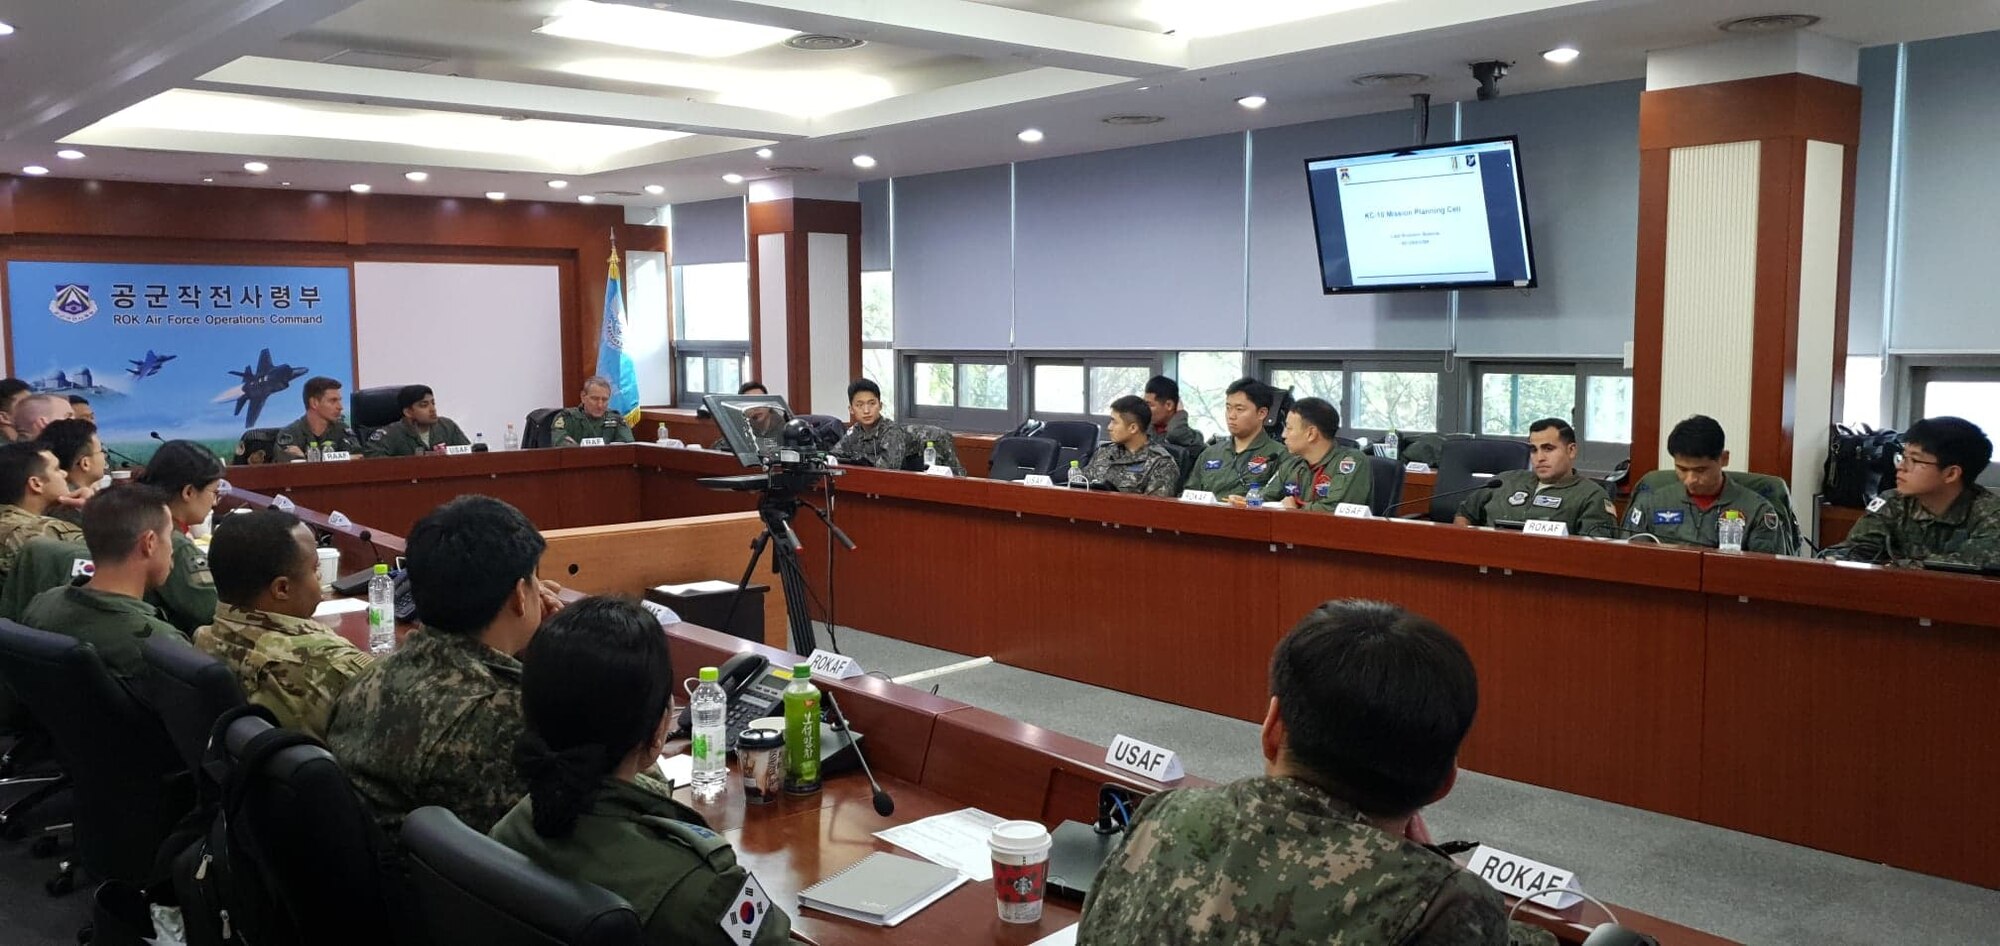 Members of the 607 Air Operations Center hosted a Pacific Tanker Symposium with the Republic of Korea Air Force Operations Command, Air Mobility Branch, at Osan Air Base, ROK, Nov. 18, 2019. Four nations participated including the United States, the Republic of Korea, Australia and the United Kingdom. The objective was to build and enhance interoperability in the Pacific region between tanker communities from allied nations. (U.S. Air Force courtesy photo)